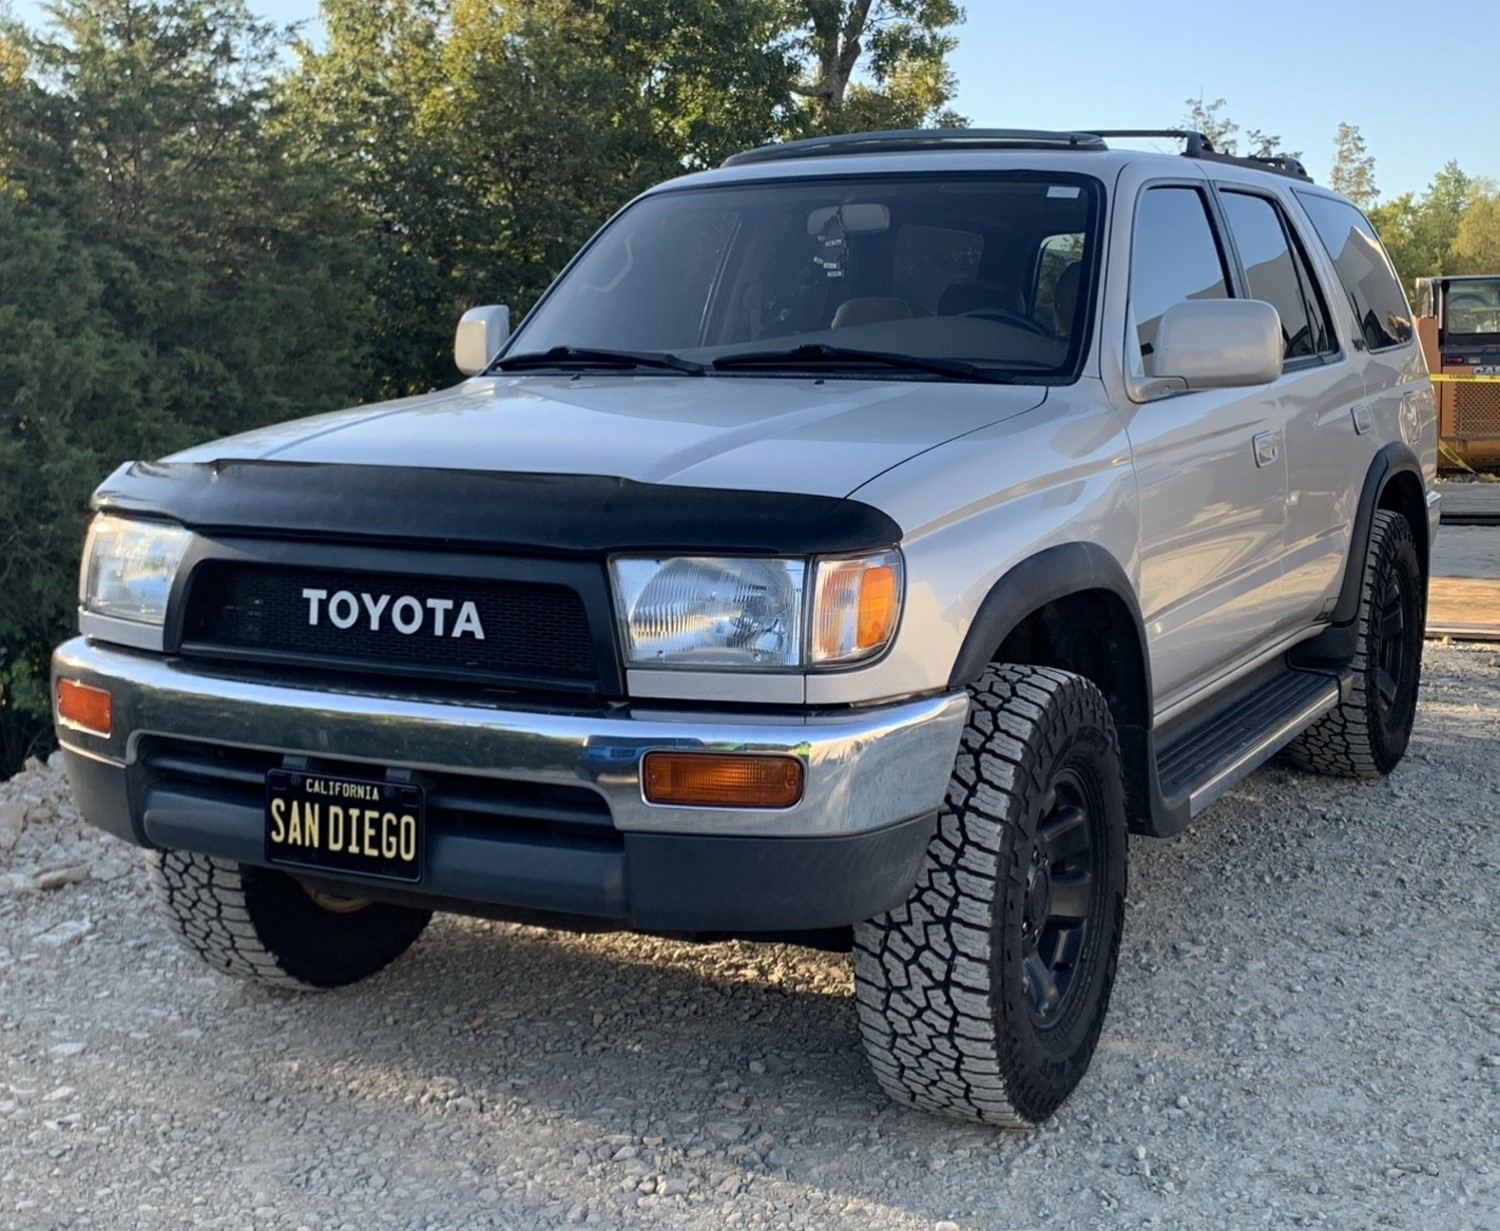 Satoshi Style: Upgrading Your Toyota 4Runner with a Custom Grille and Emblem